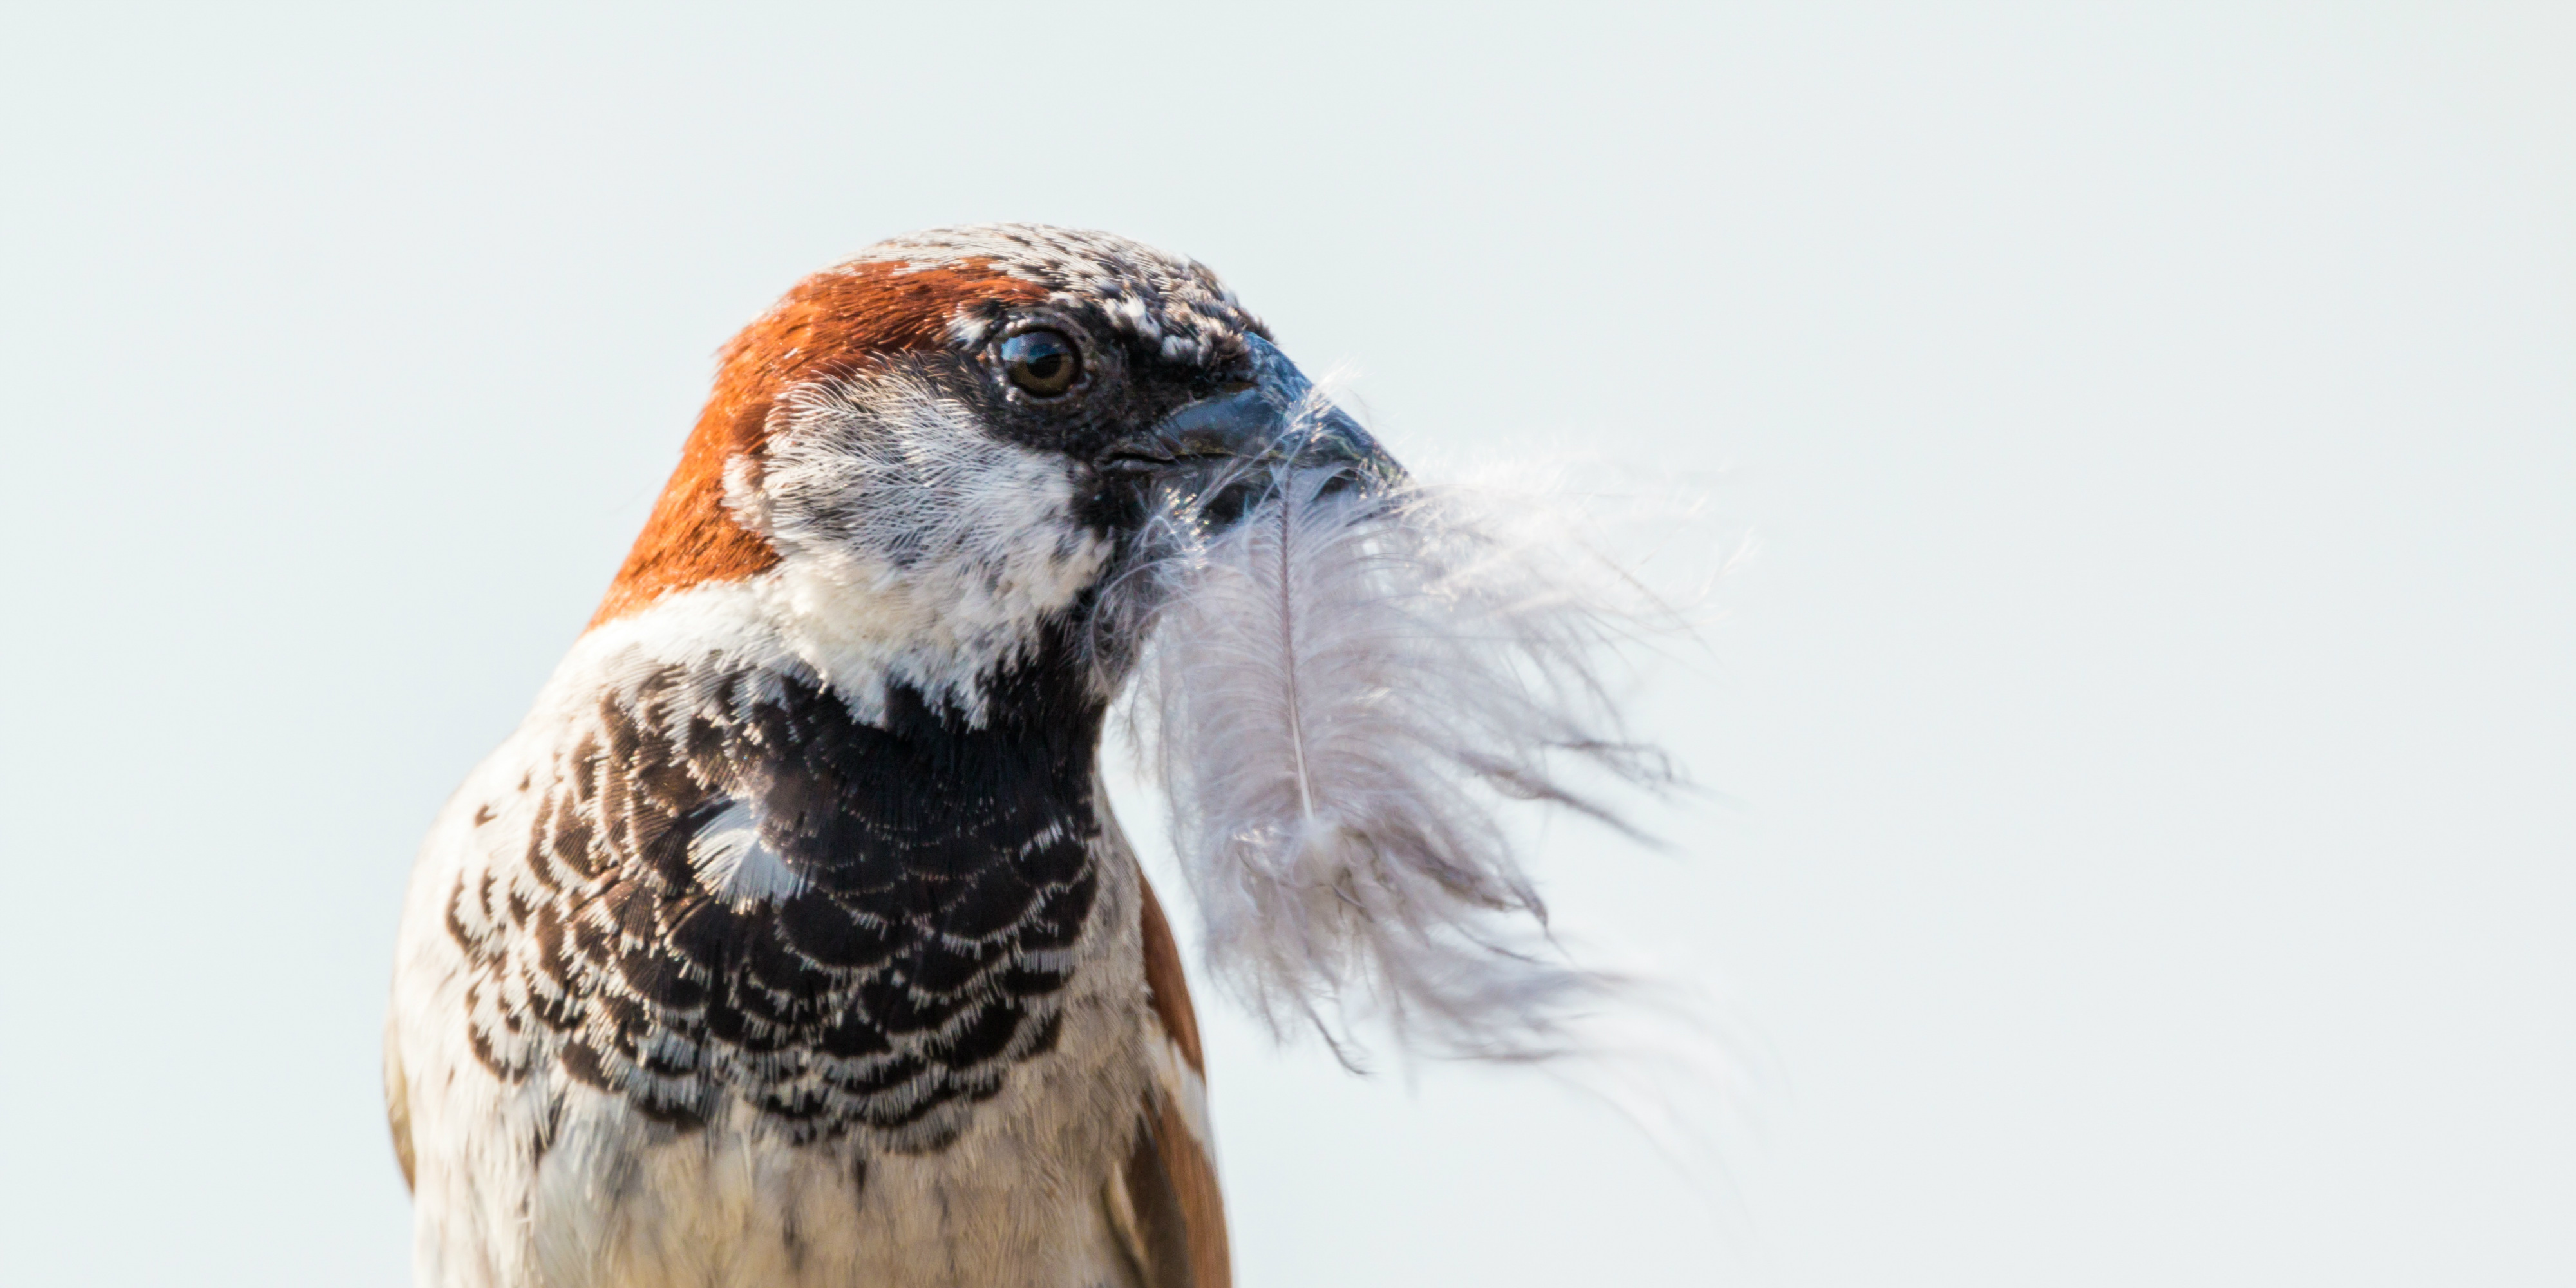 A bird collects feathers to provide insulation in its nest | eco-friendly tourism.